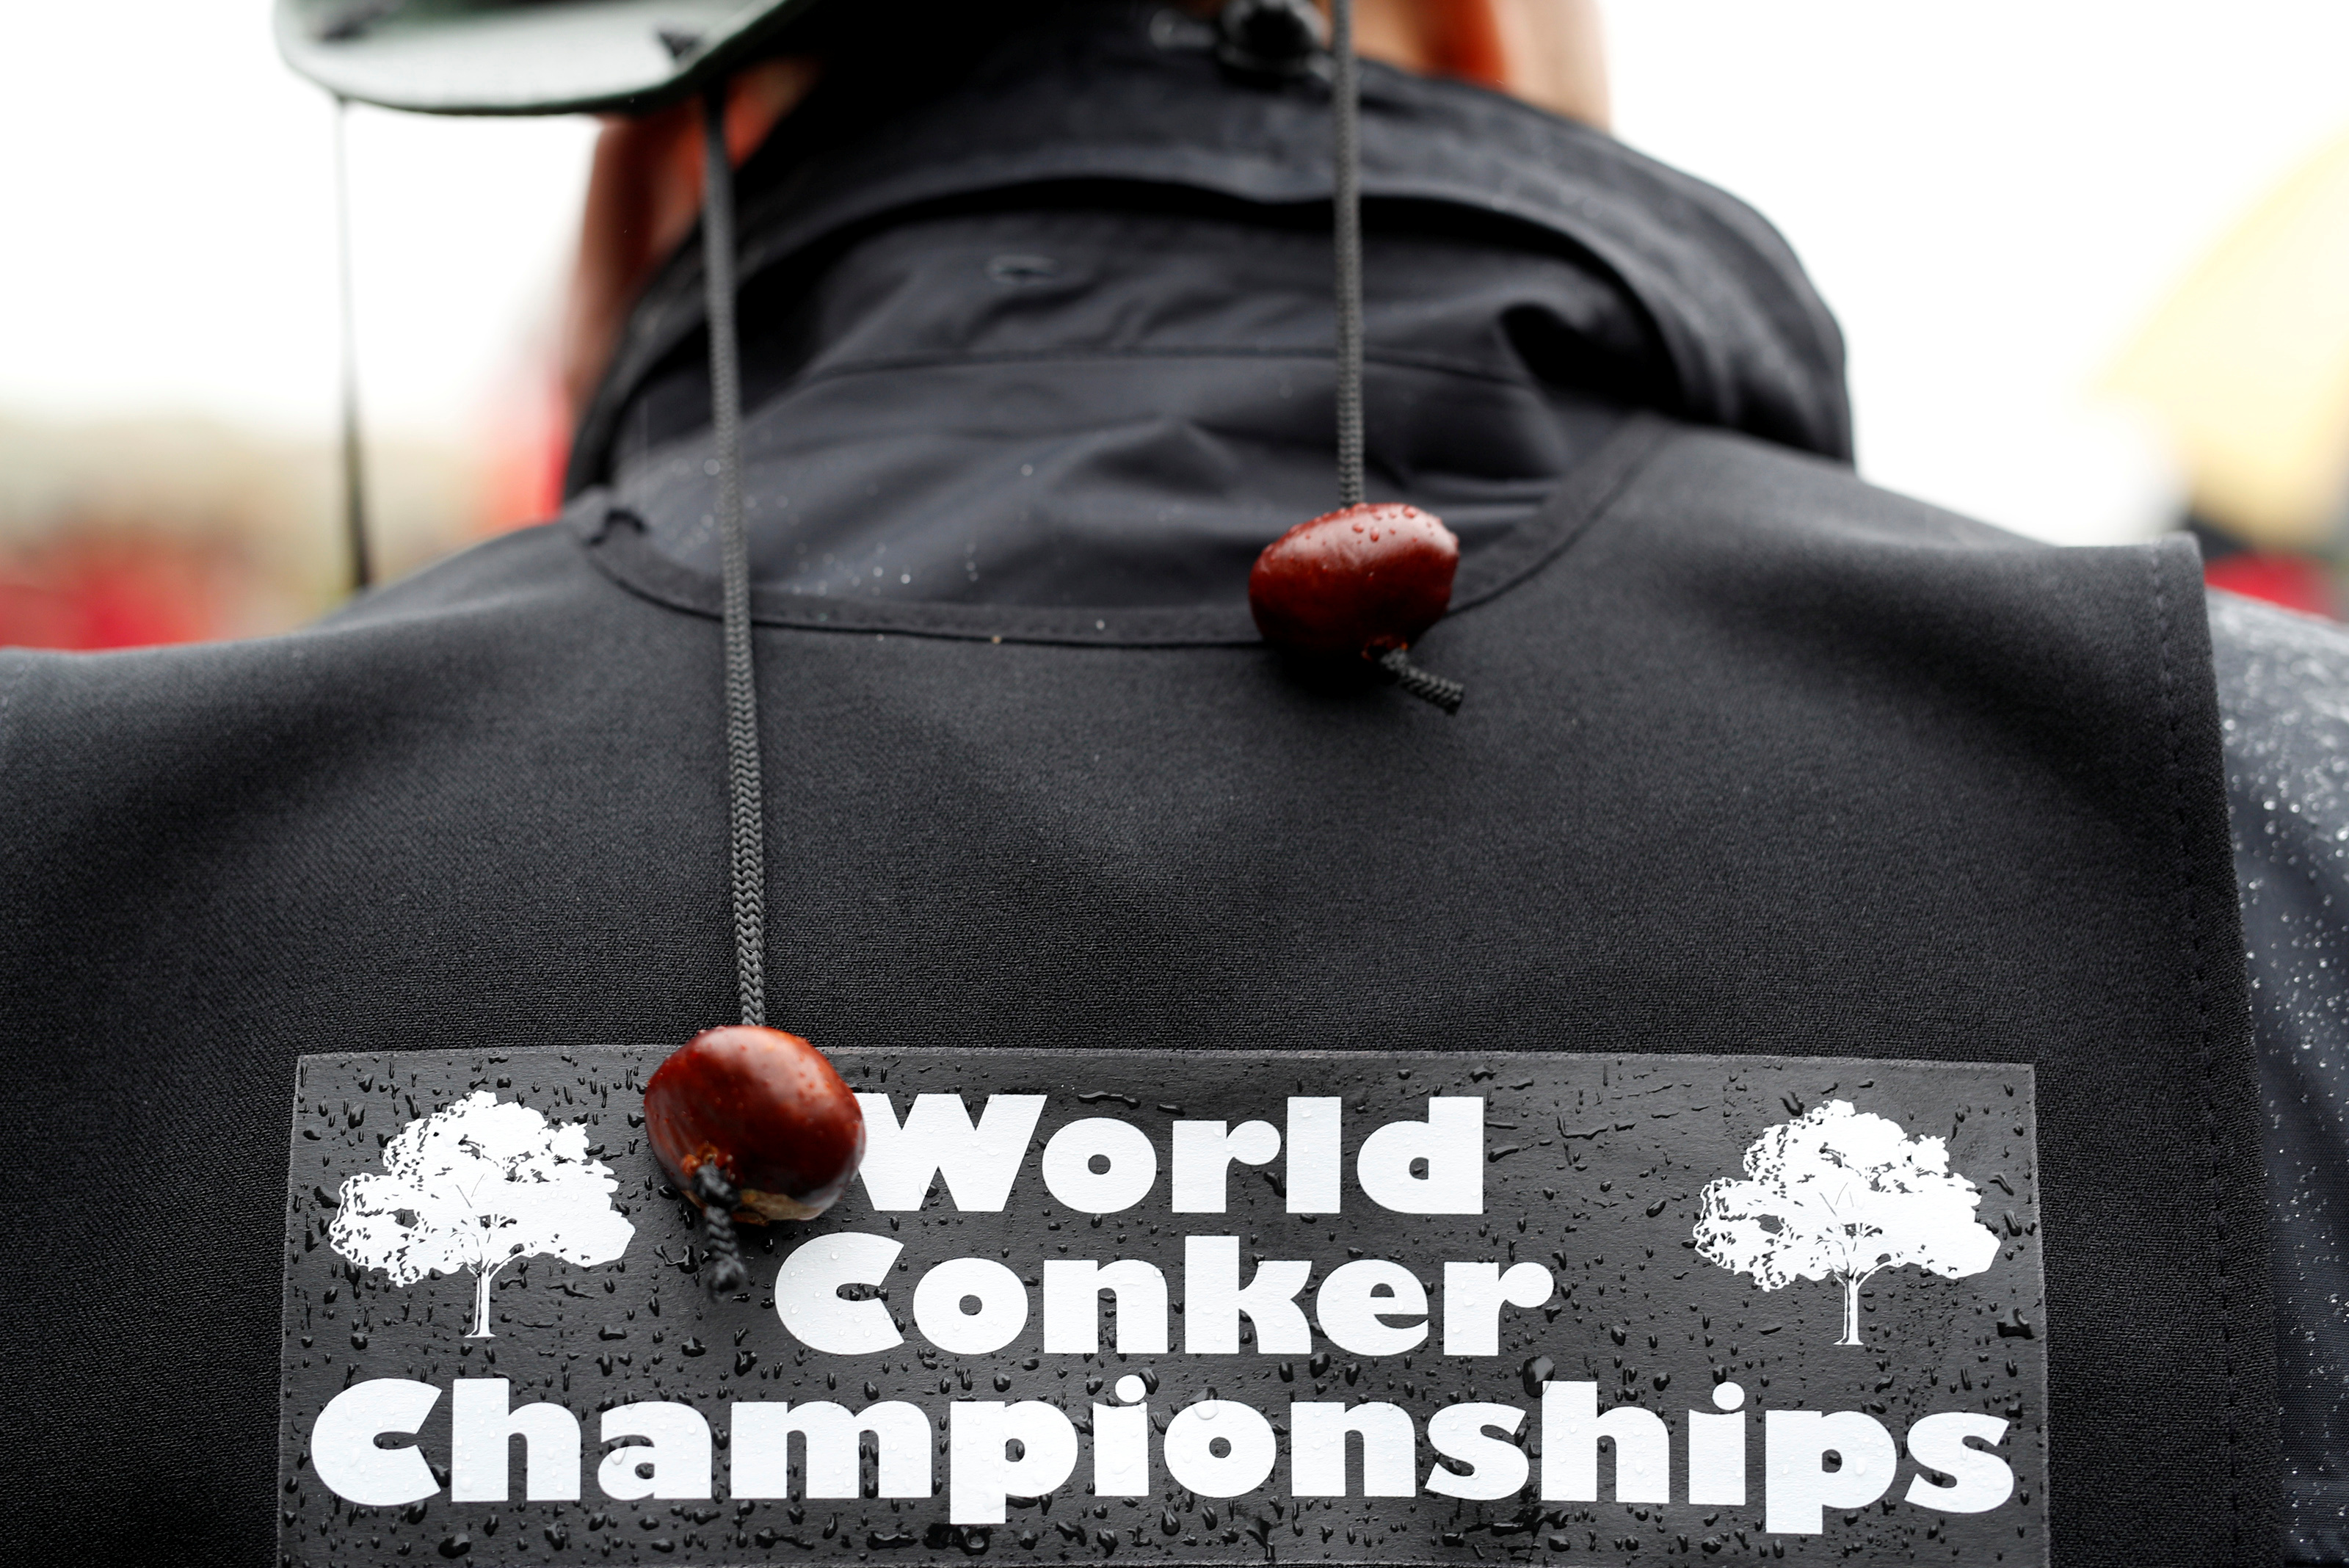 She came, she saw, she conquered, British woman claims conker crown